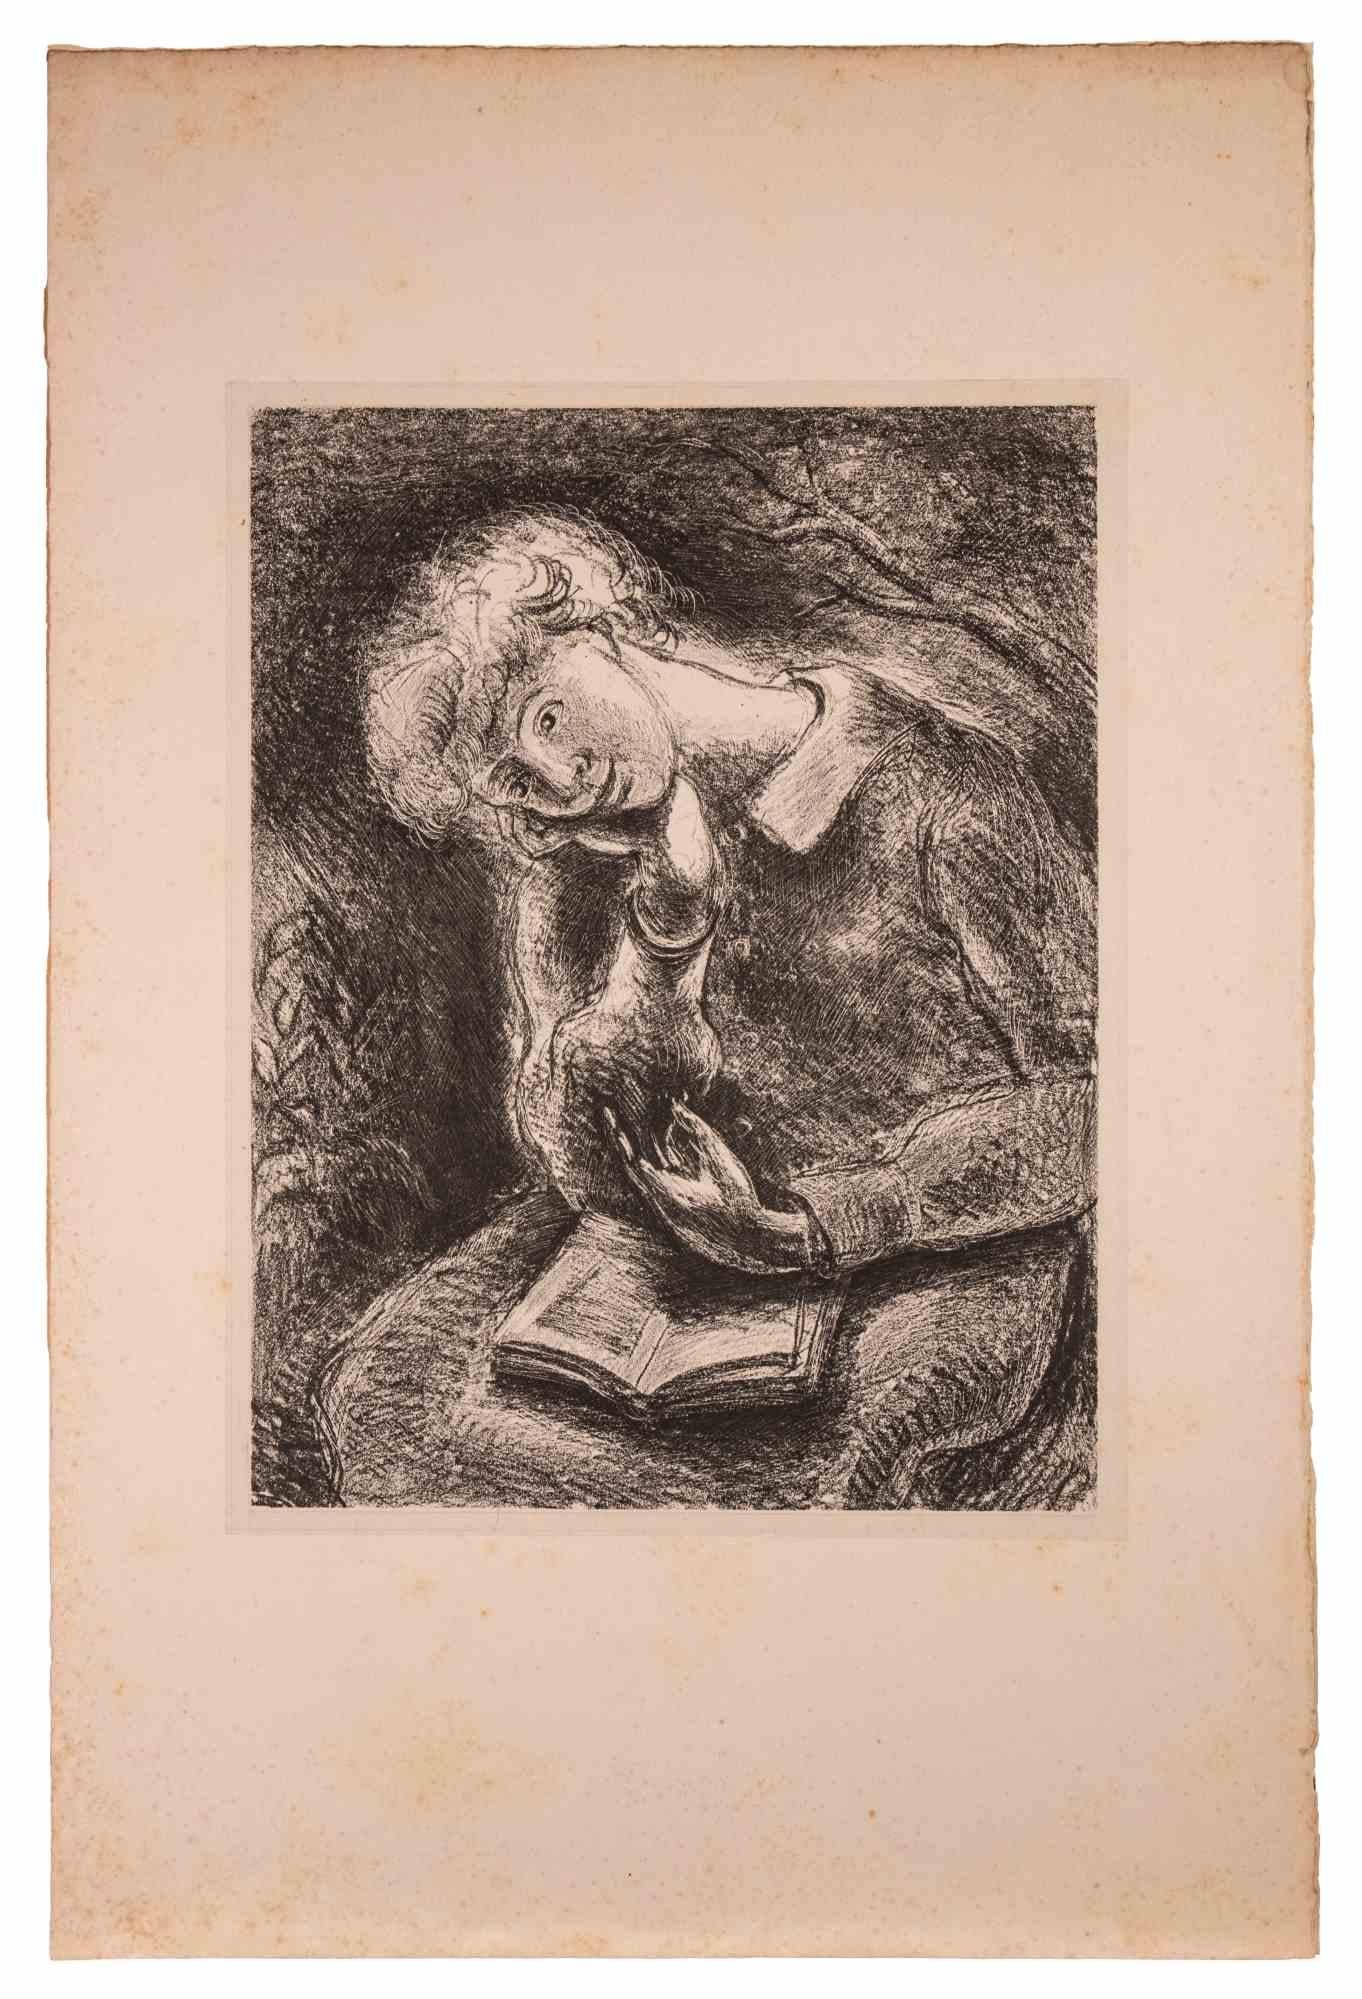 Child is a Lithograph on ivory-colored paper realized by Luc Albert Moreau.

The artwork is in good condition, included a white cardboard passpartout (52.5x36 cm).

No signature.

Luc-Albert Moreau (1882-1948) is a French painter, engraver,